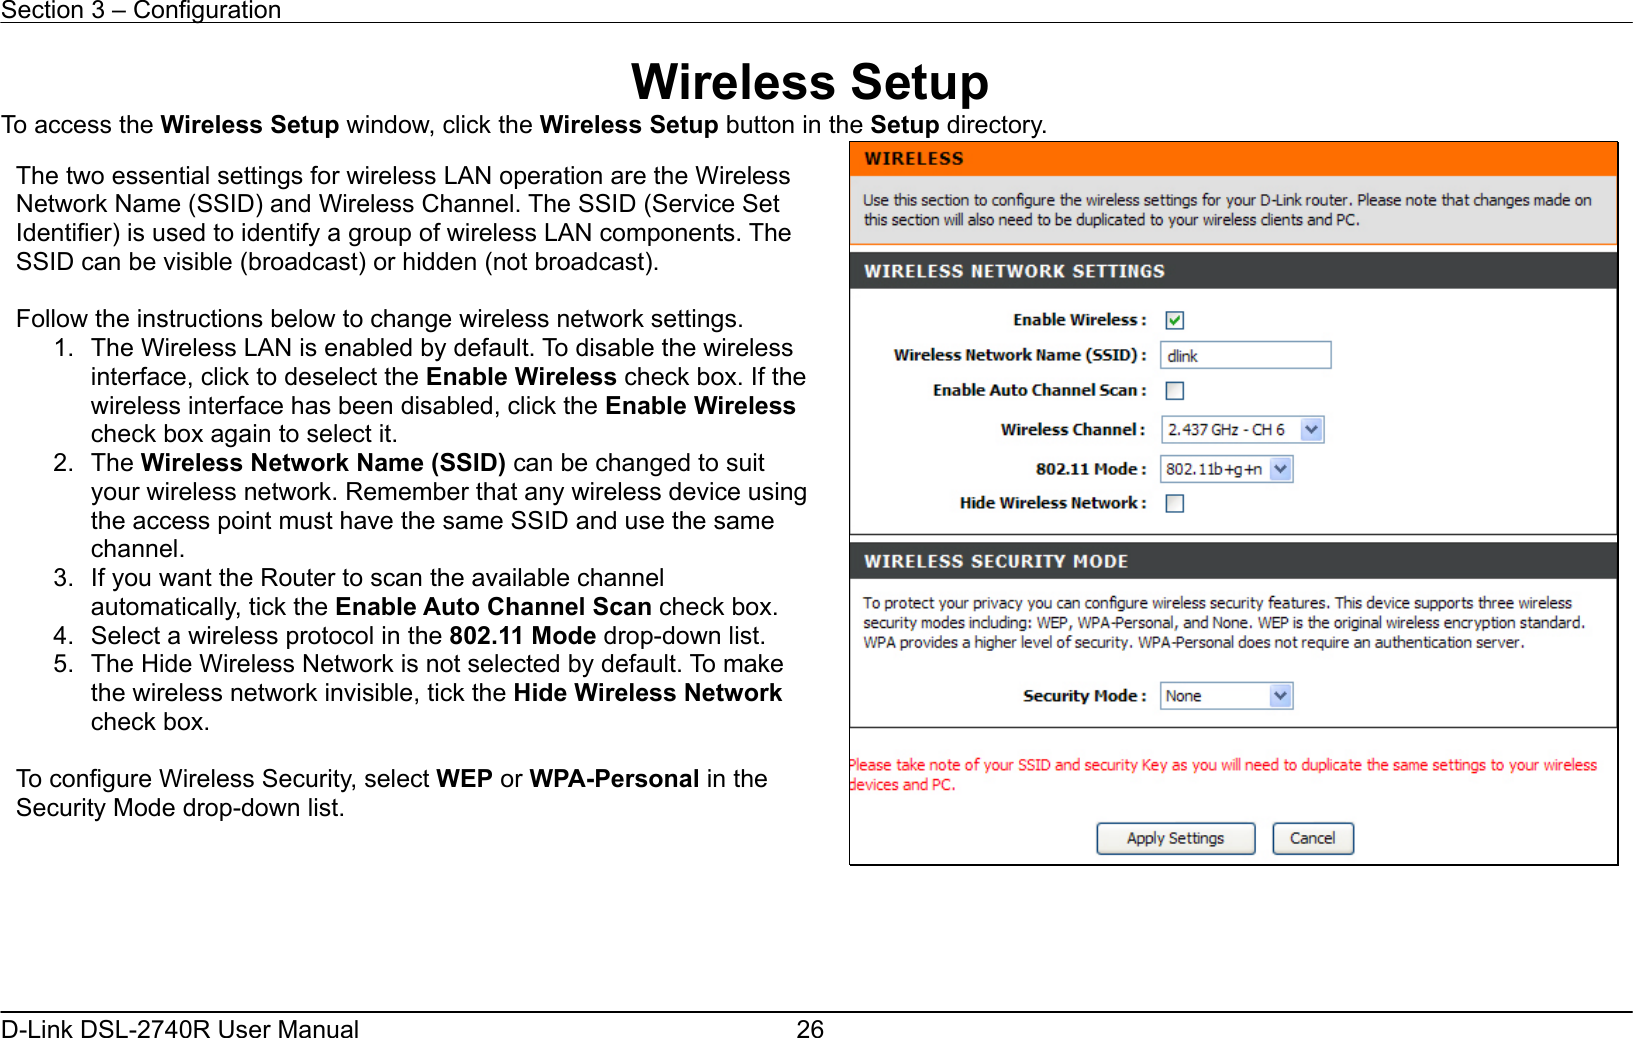 Section 3 – Configuration   D-Link DSL-2740R User Manual  26Wireless Setup To access the Wireless Setup window, click the Wireless Setup button in the Setup directory.       The two essential settings for wireless LAN operation are the Wireless Network Name (SSID) and Wireless Channel. The SSID (Service Set Identifier) is used to identify a group of wireless LAN components. The SSID can be visible (broadcast) or hidden (not broadcast).  Follow the instructions below to change wireless network settings. 1.  The Wireless LAN is enabled by default. To disable the wireless interface, click to deselect the Enable Wireless check box. If the wireless interface has been disabled, click the Enable Wireless check box again to select it. 2. The Wireless Network Name (SSID) can be changed to suit your wireless network. Remember that any wireless device using the access point must have the same SSID and use the same channel. 3.  If you want the Router to scan the available channel automatically, tick the Enable Auto Channel Scan check box. 4. Select a wireless protocol in the 802.11 Mode drop-down list. 5.  The Hide Wireless Network is not selected by default. To make the wireless network invisible, tick the Hide Wireless Network check box.  To configure Wireless Security, select WEP or WPA-Personal in the Security Mode drop-down list. 